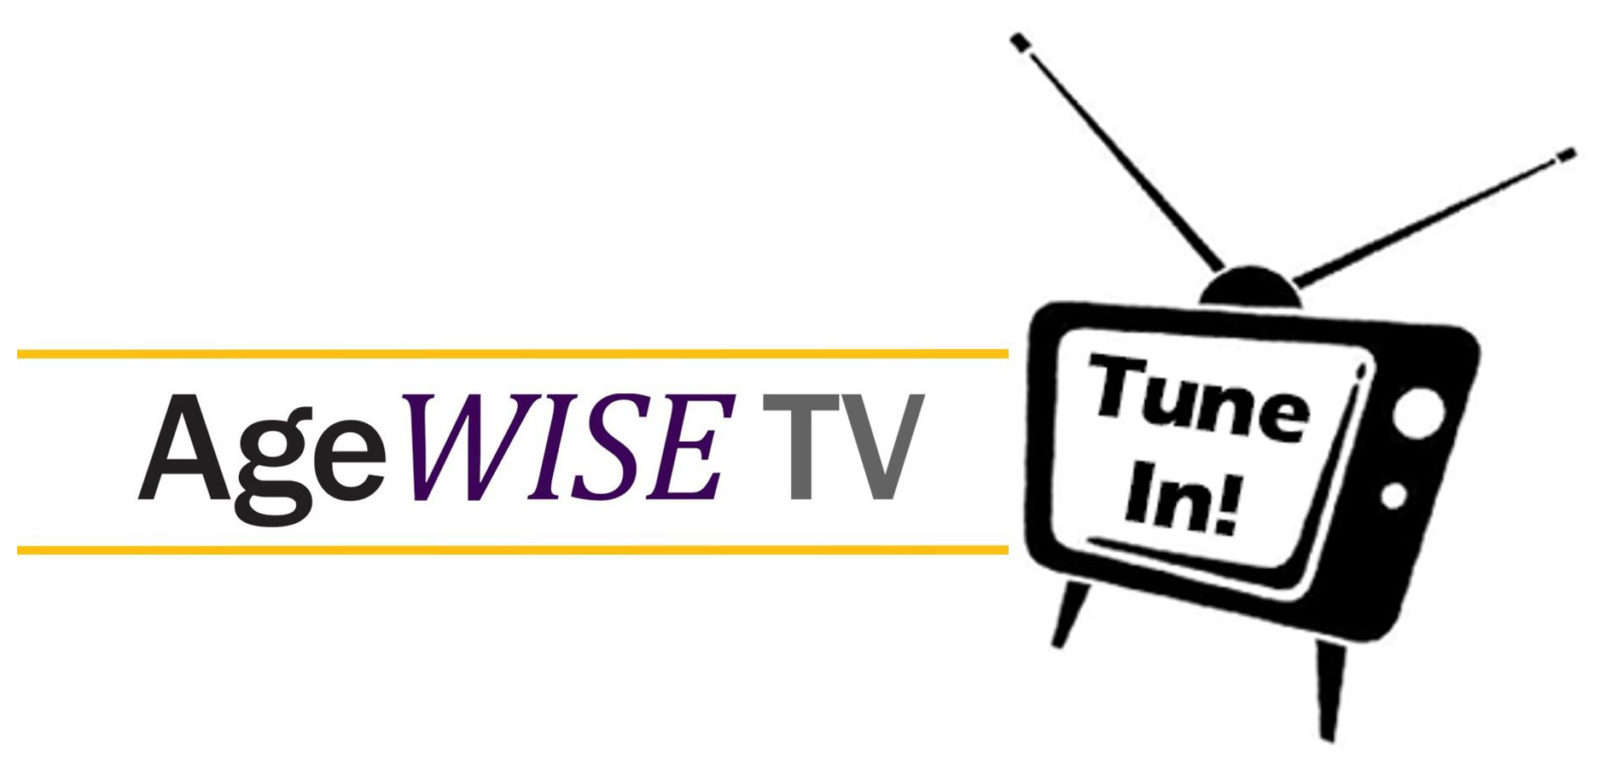 AgeWise TV graphic - tune in!